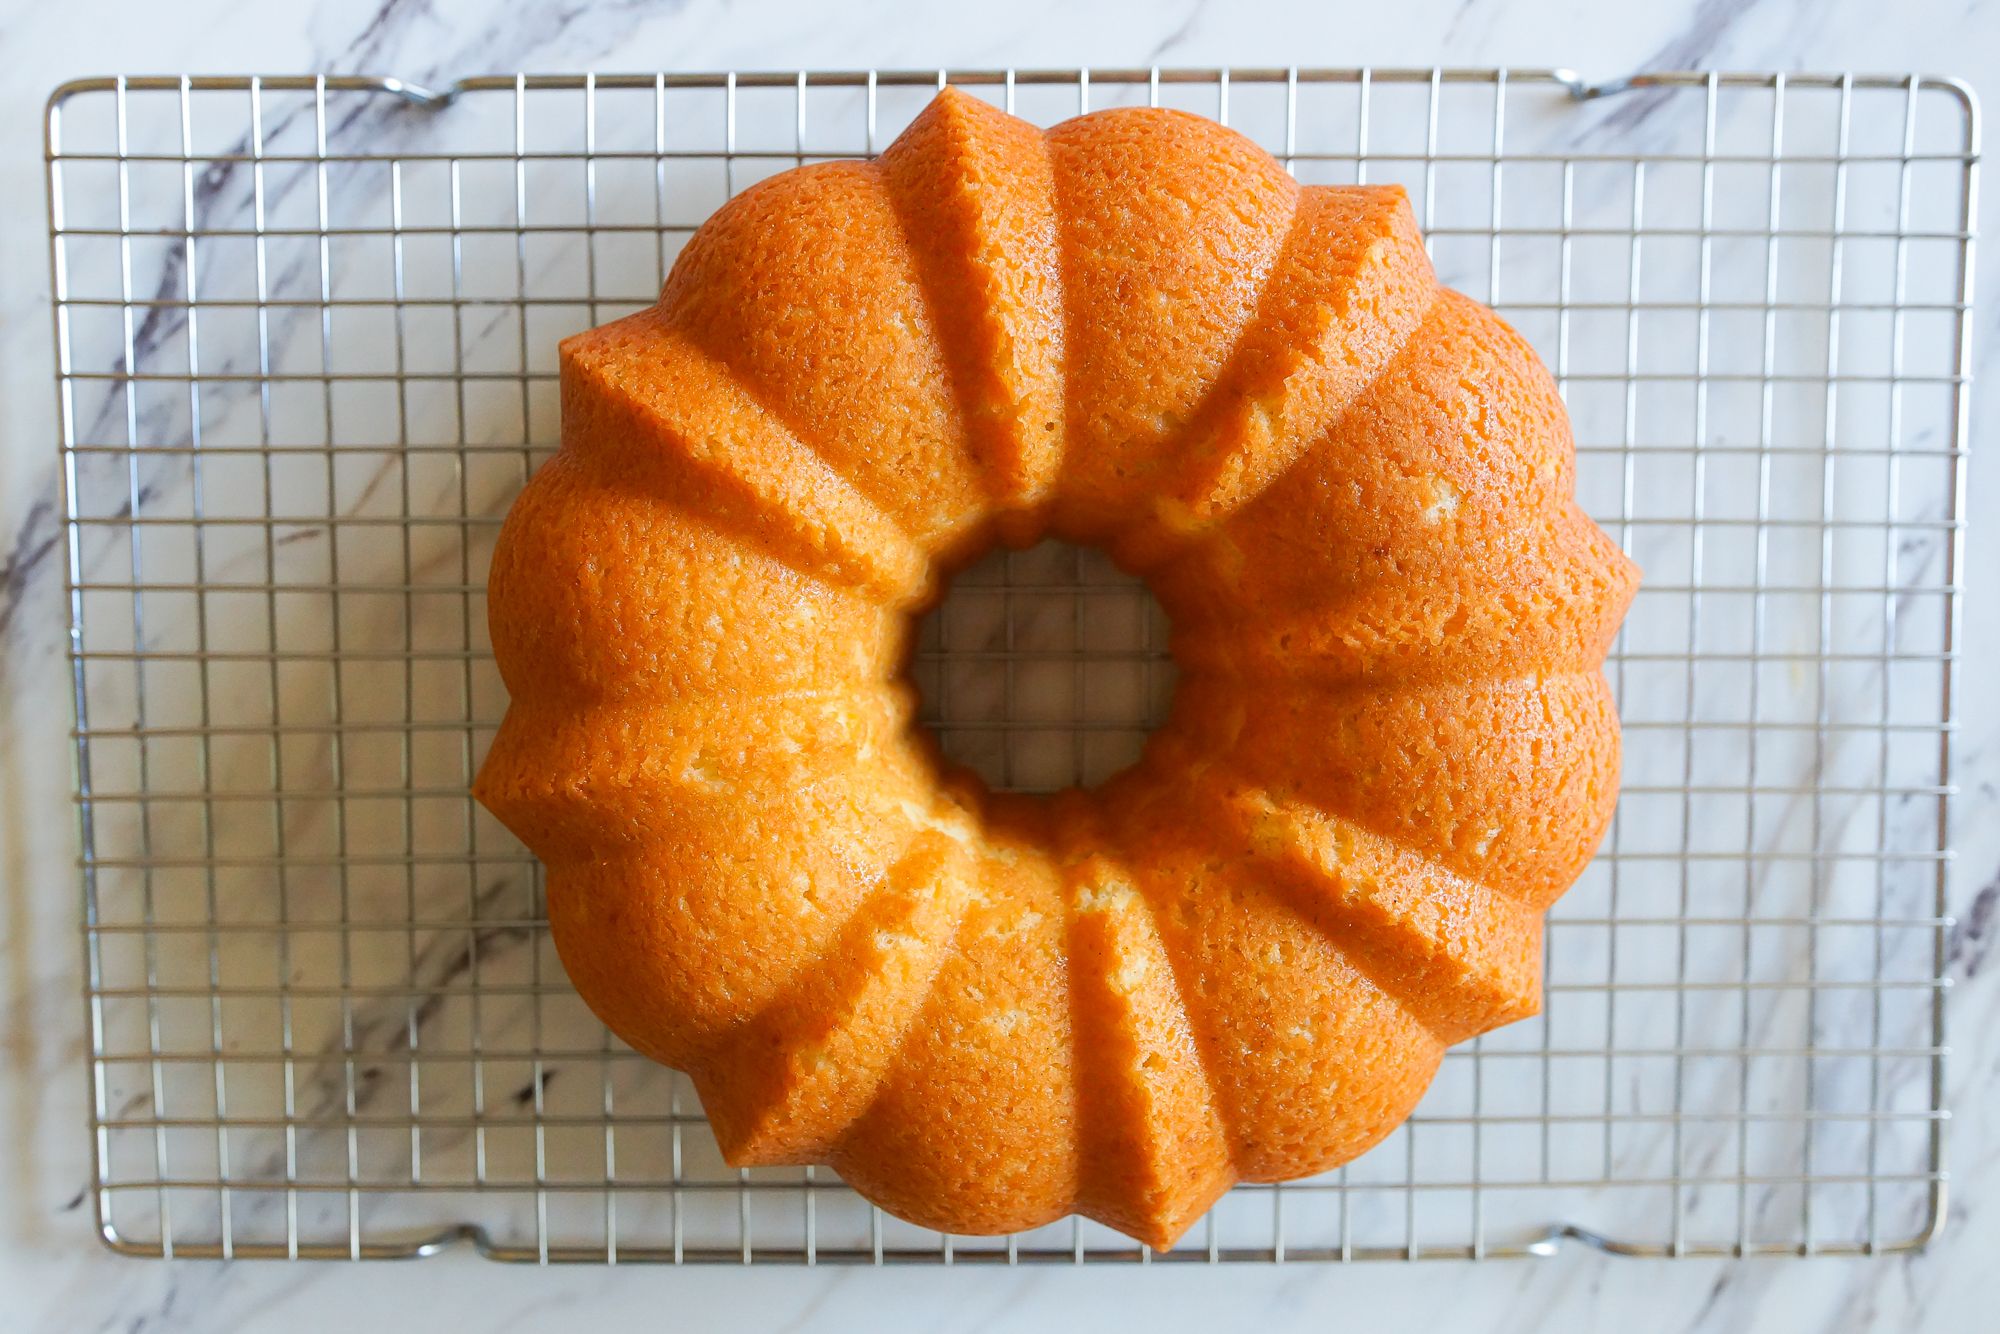 https://hips.hearstapps.com/thepioneerwoman/wp-content/uploads/2018/12/Tips-for-Baking-with-a-Bundt-Pan-cake-baked.jpg